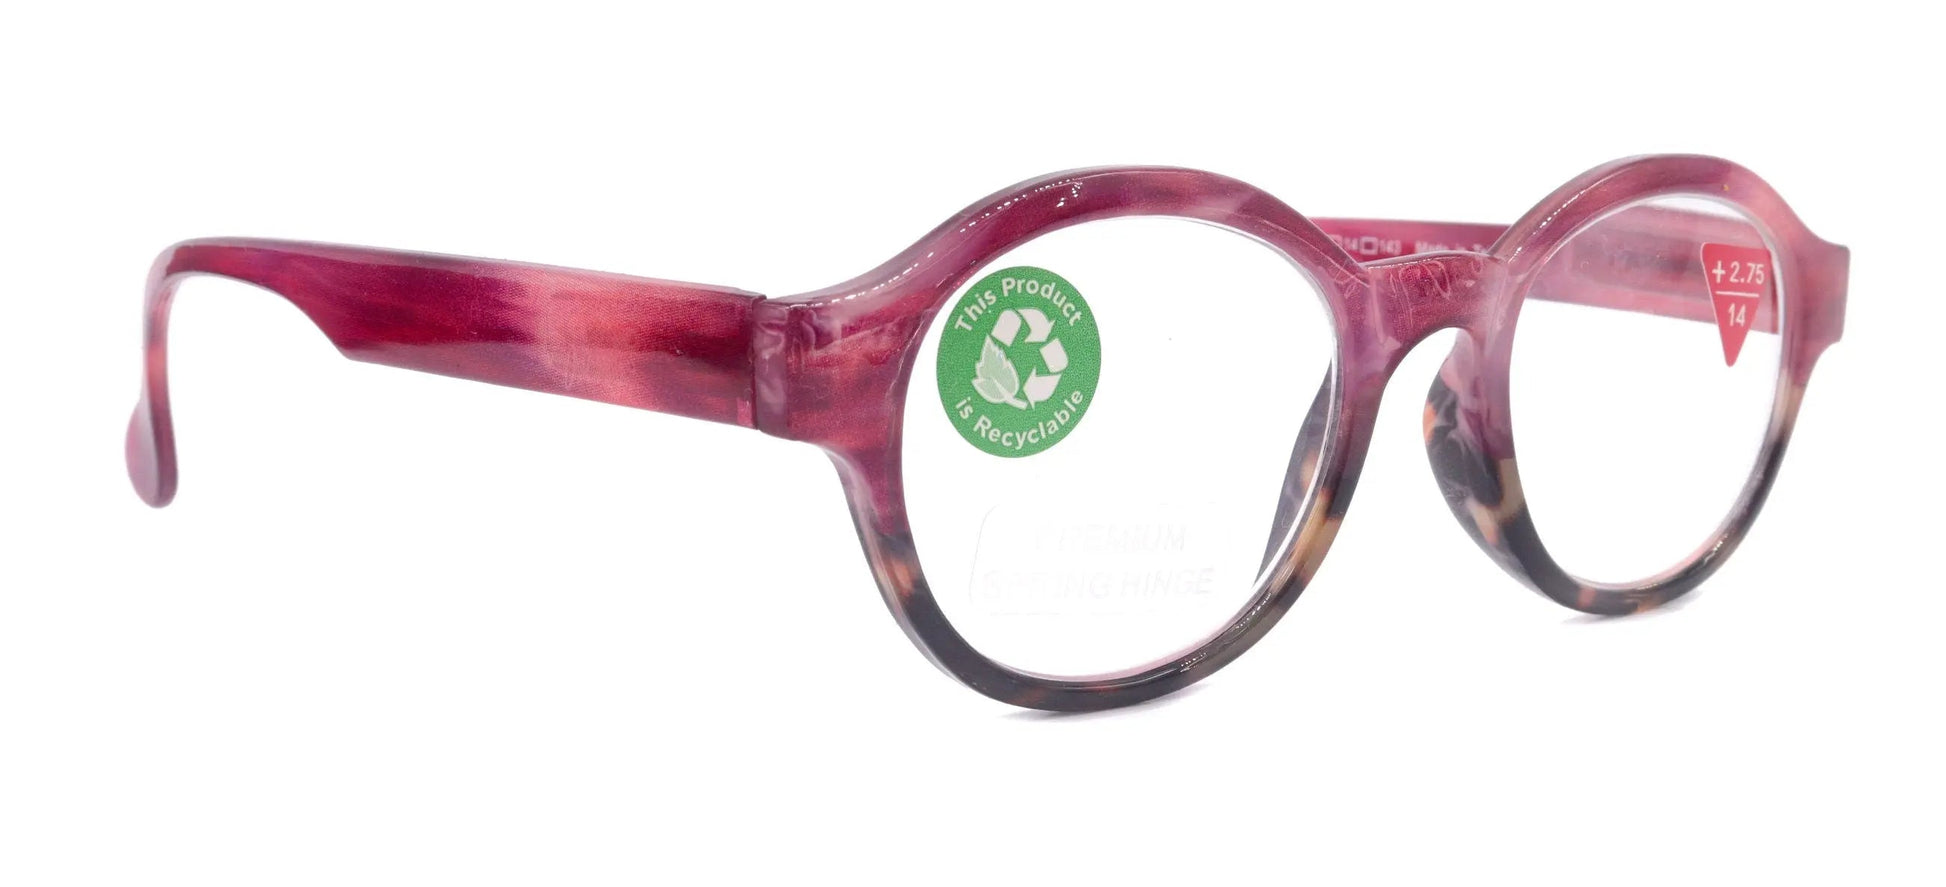 The ALCHEMIST, (Premium) Reading Glasses, Round Frame  +1.25 .. +3 Magnifying Eyeglasses (Marble Pink) Circle Style. NY Fifth Avenue